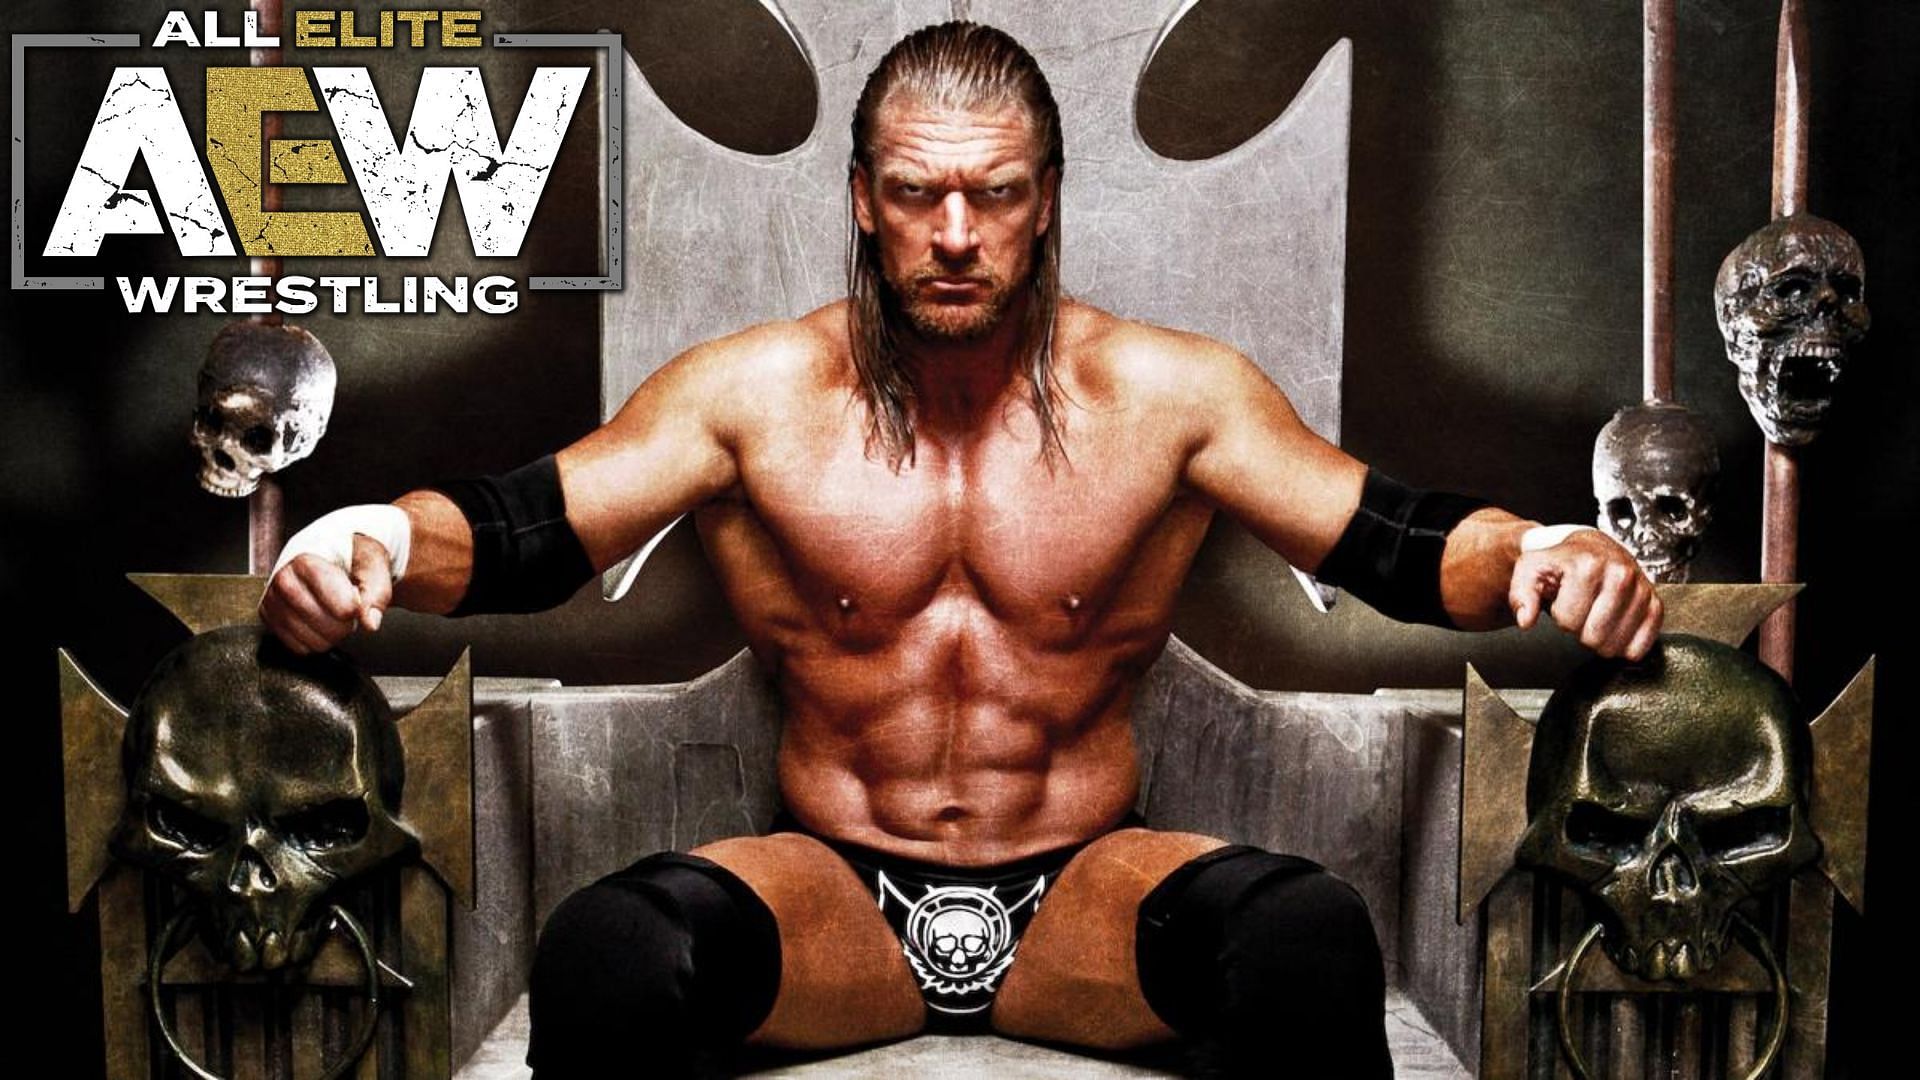 Triple H was one of the most dominating stars on the WWE roster during the 2000s.